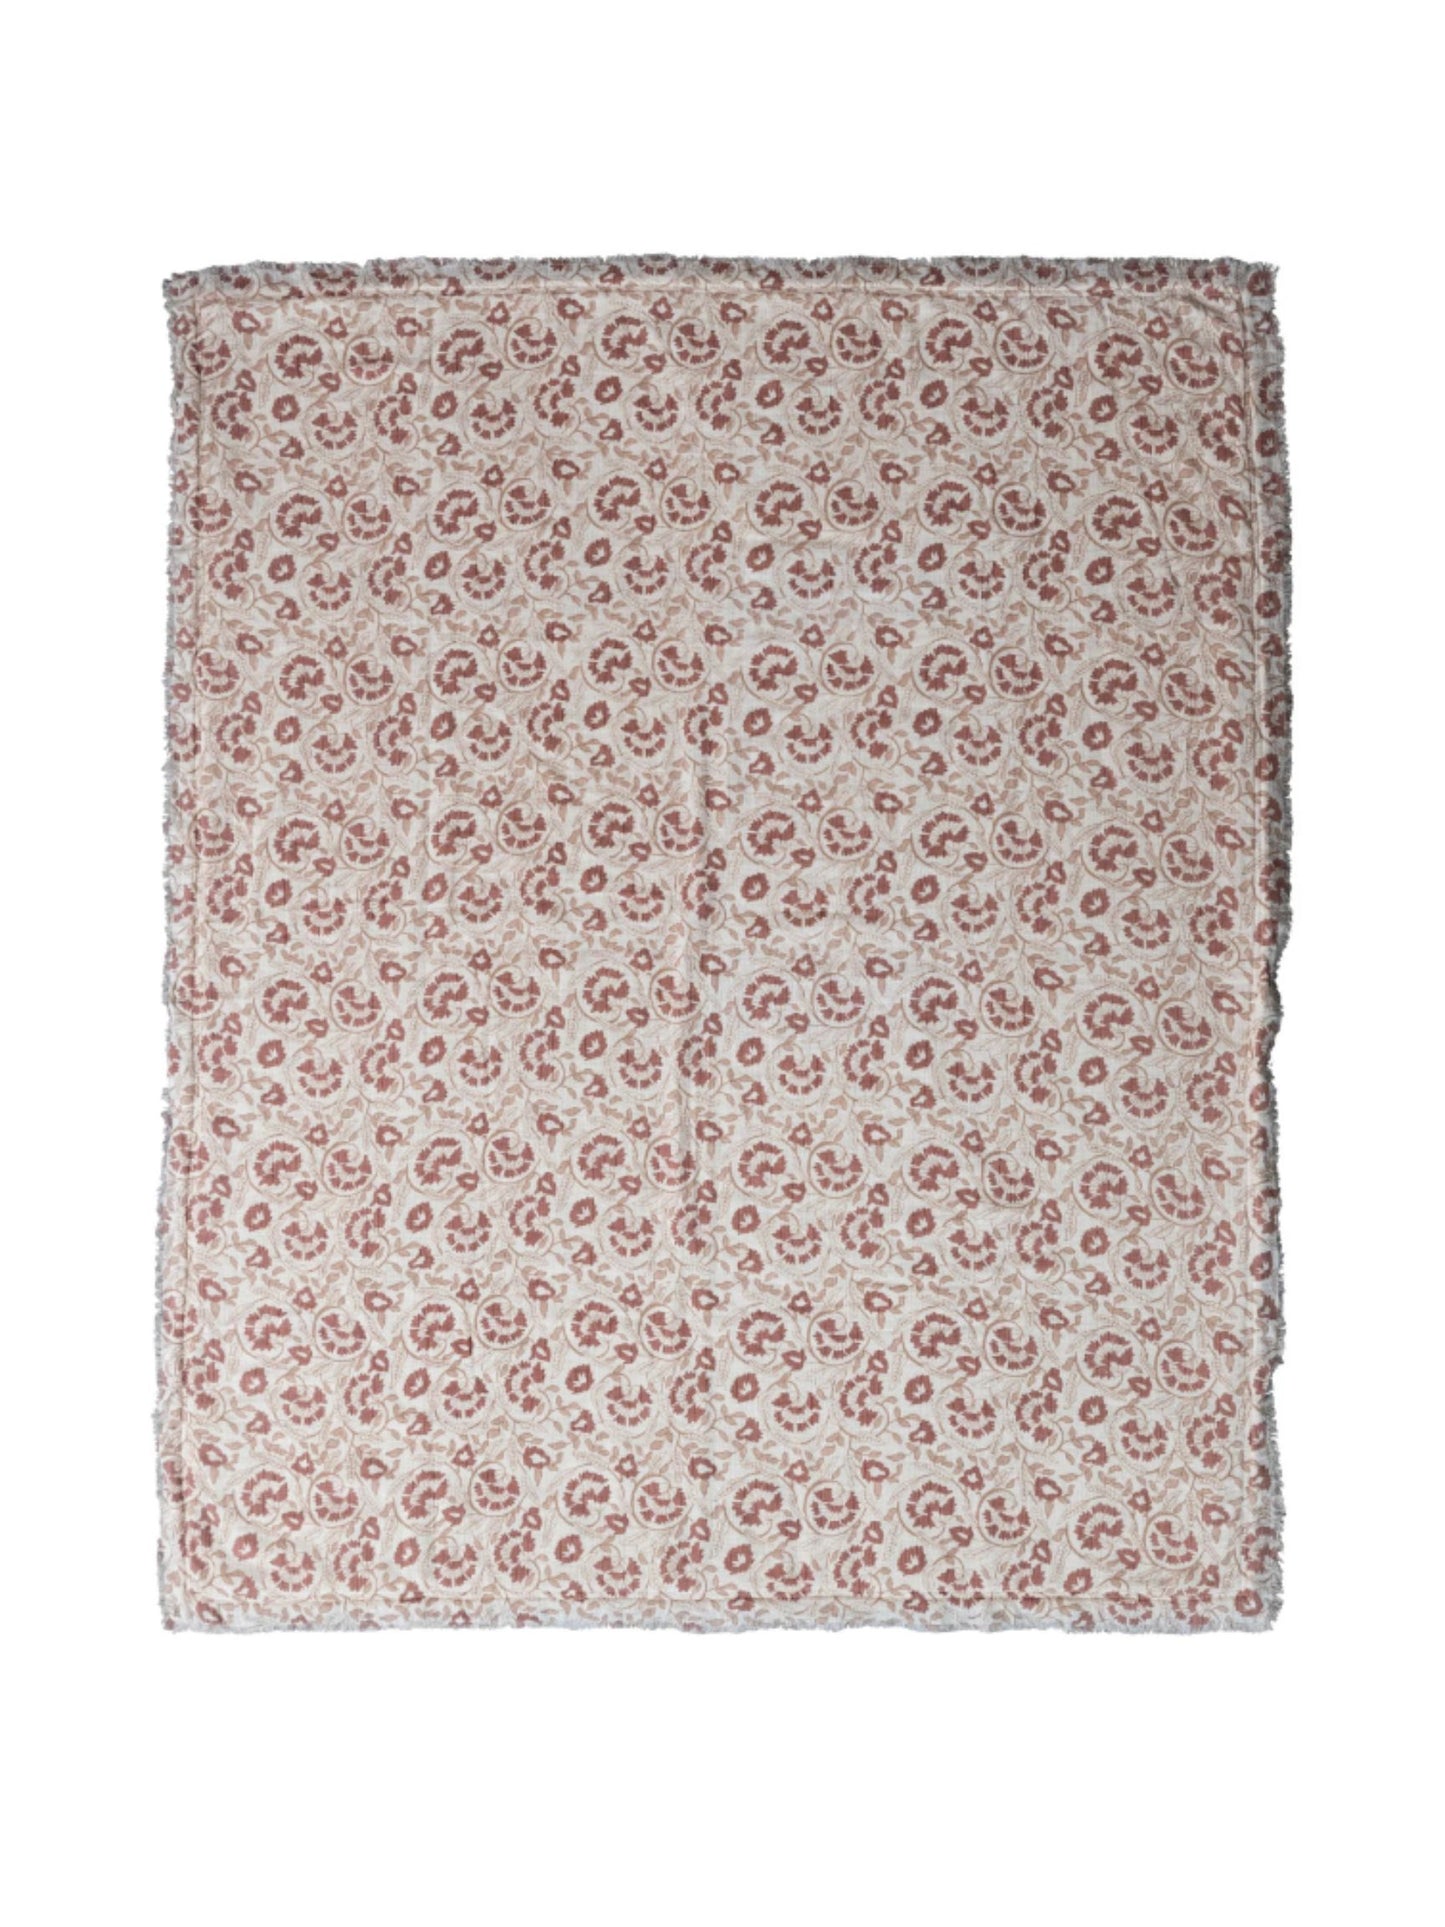 Woven Cotton Printed Throw w/ Sherpa Back - Rose